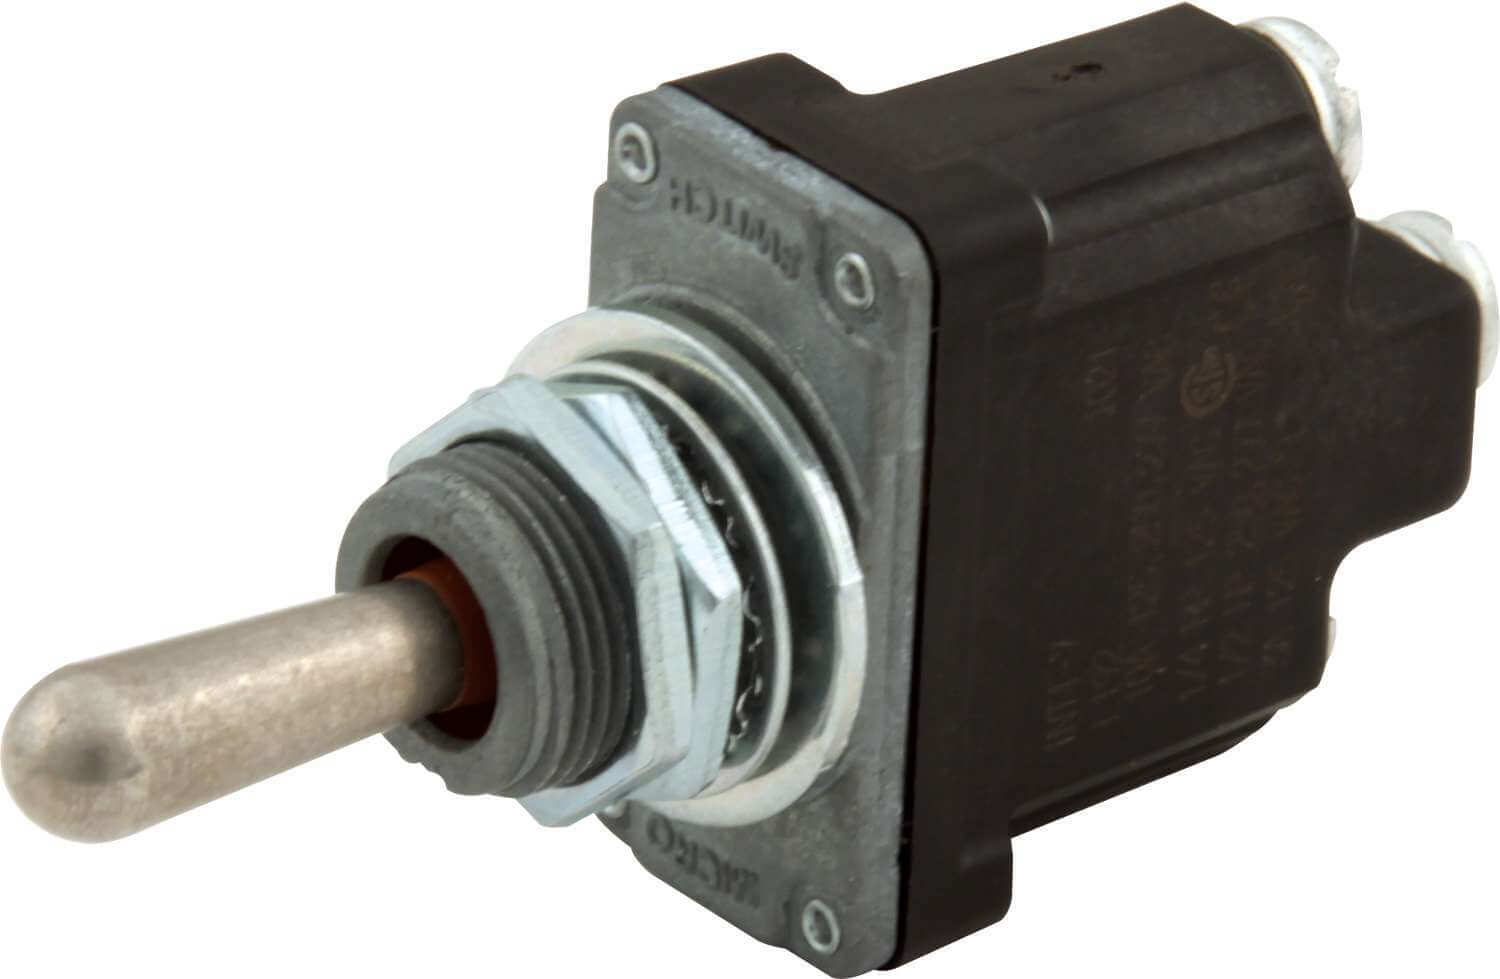 Momentary Toggle Switch - $29.95